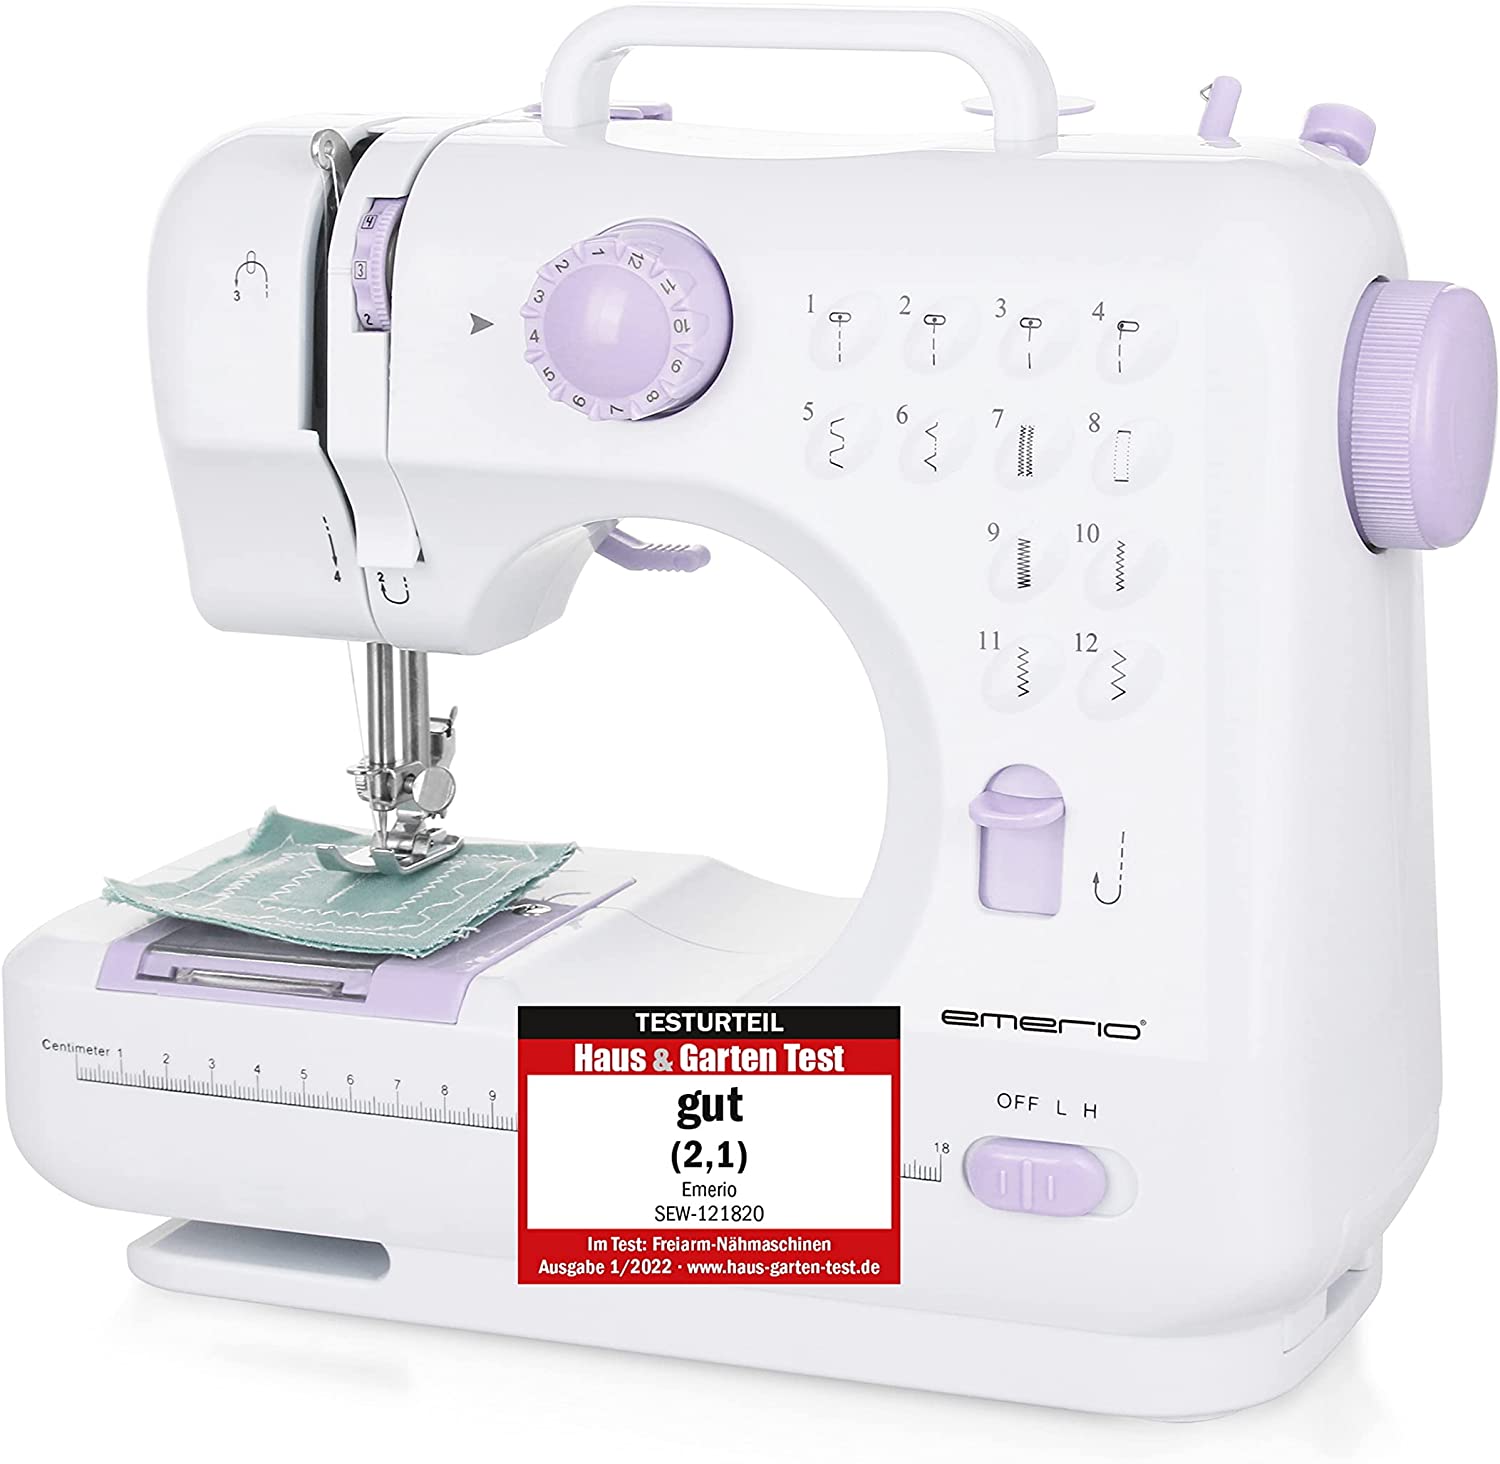 Emerio SEW-121820 Sewing Machine for Kids and Beginners, 12 Stitch Patterns, Mini Sewing Machine with Foot Pedal, Power and Battery Operated, Home, LED Light, Automatic Forward and Backward, White/Pink